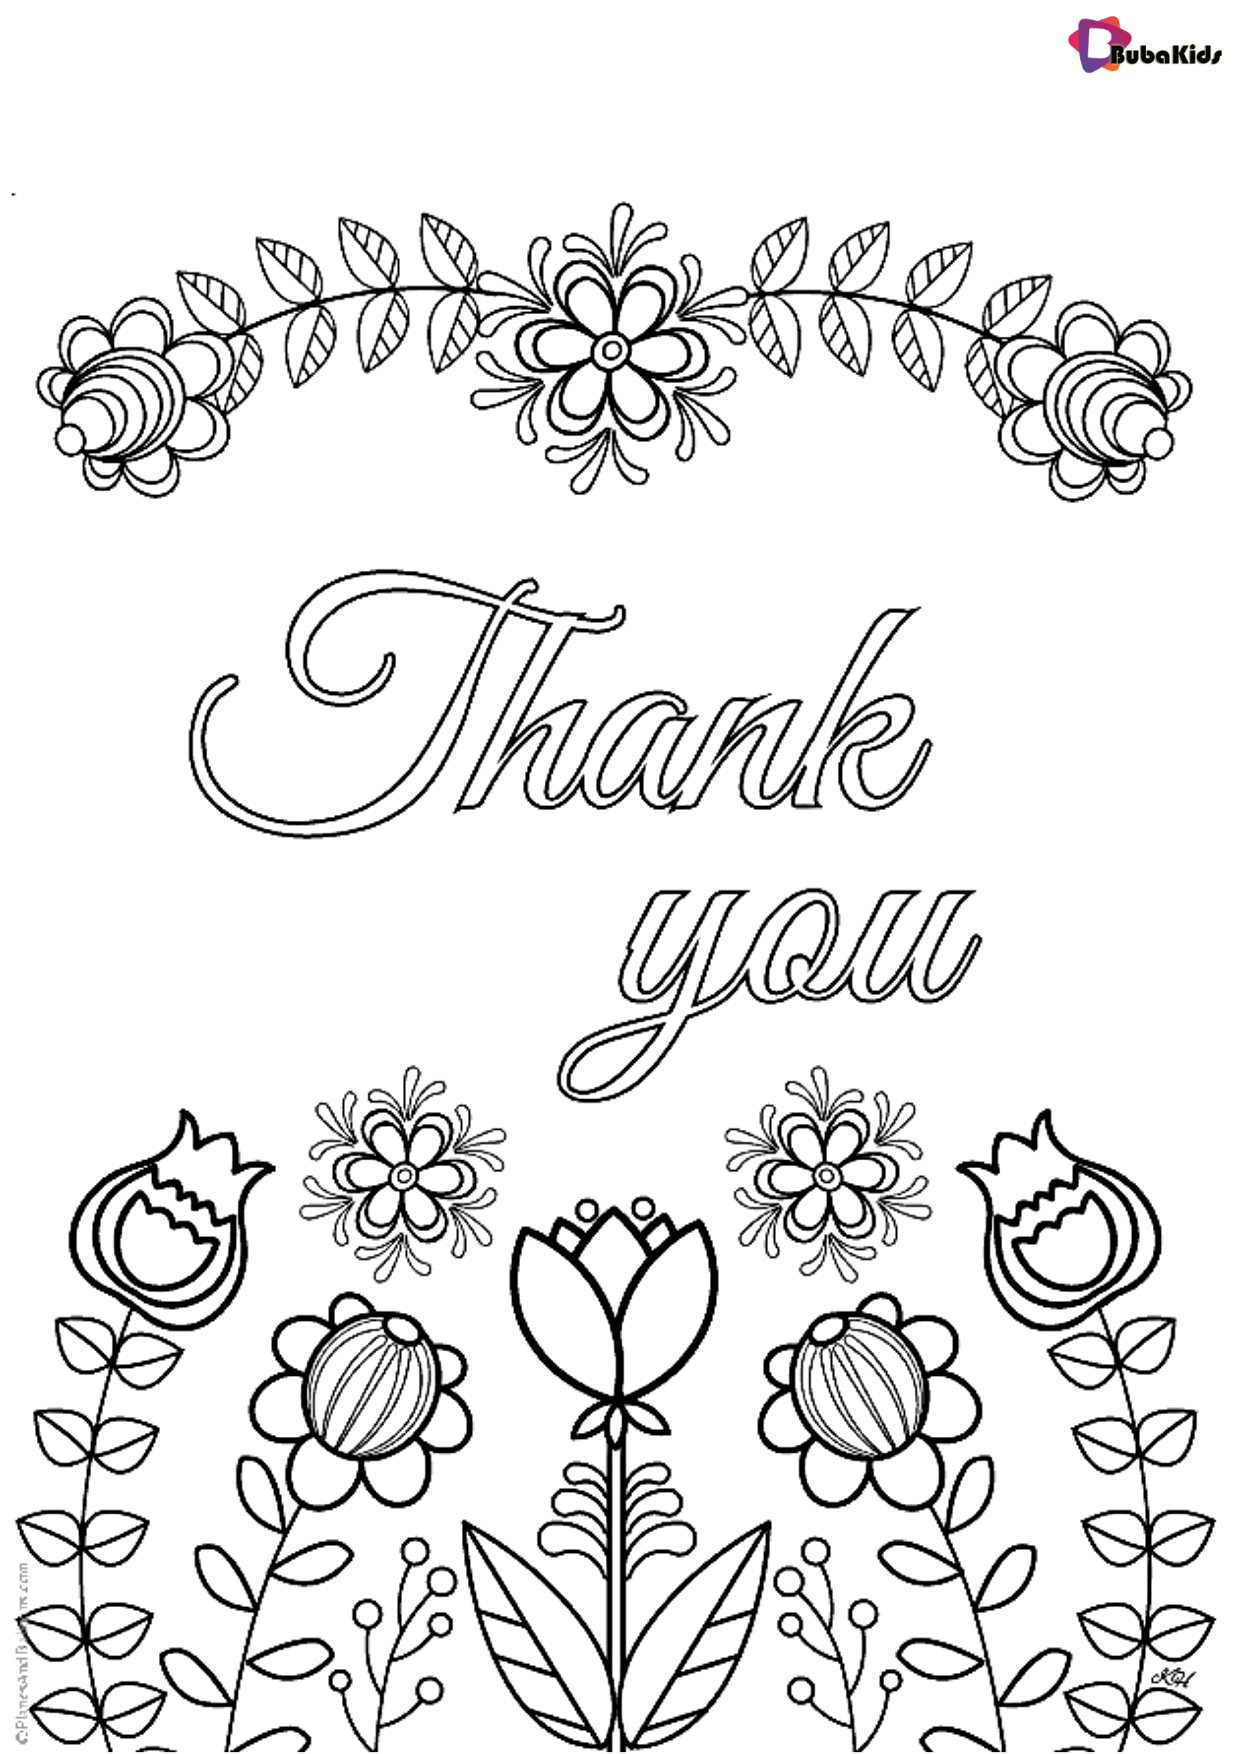 Thank you teacher coloring pages teacher appreciation day Wallpaper